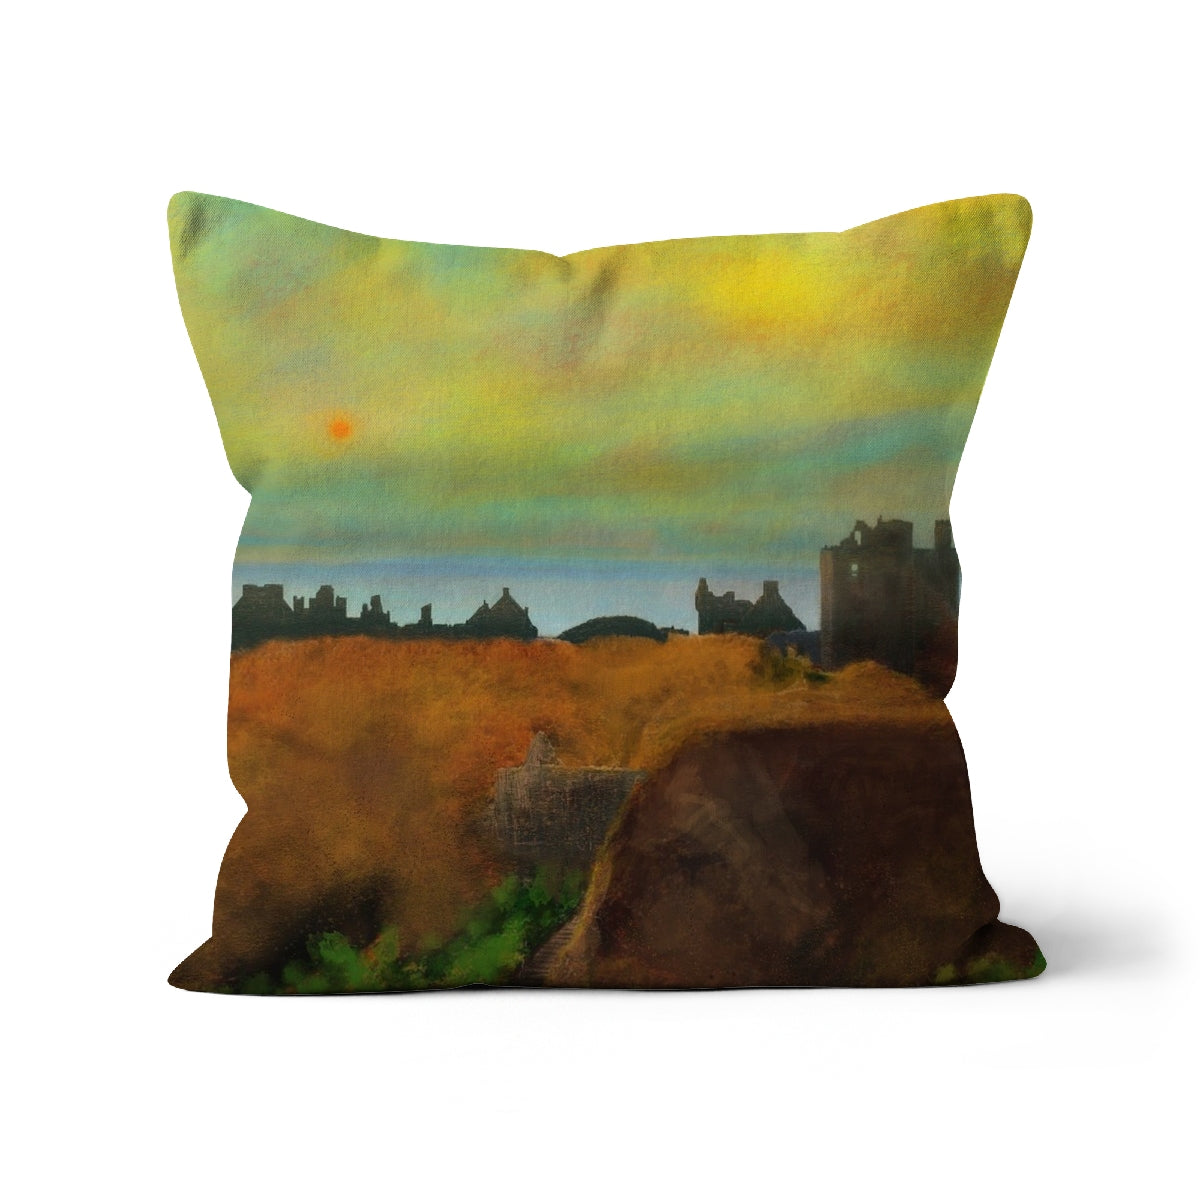 Dunnottar Castle Art Gifts Cushion-Cushions-Historic & Iconic Scotland Art Gallery-Linen-16"x16"-Paintings, Prints, Homeware, Art Gifts From Scotland By Scottish Artist Kevin Hunter